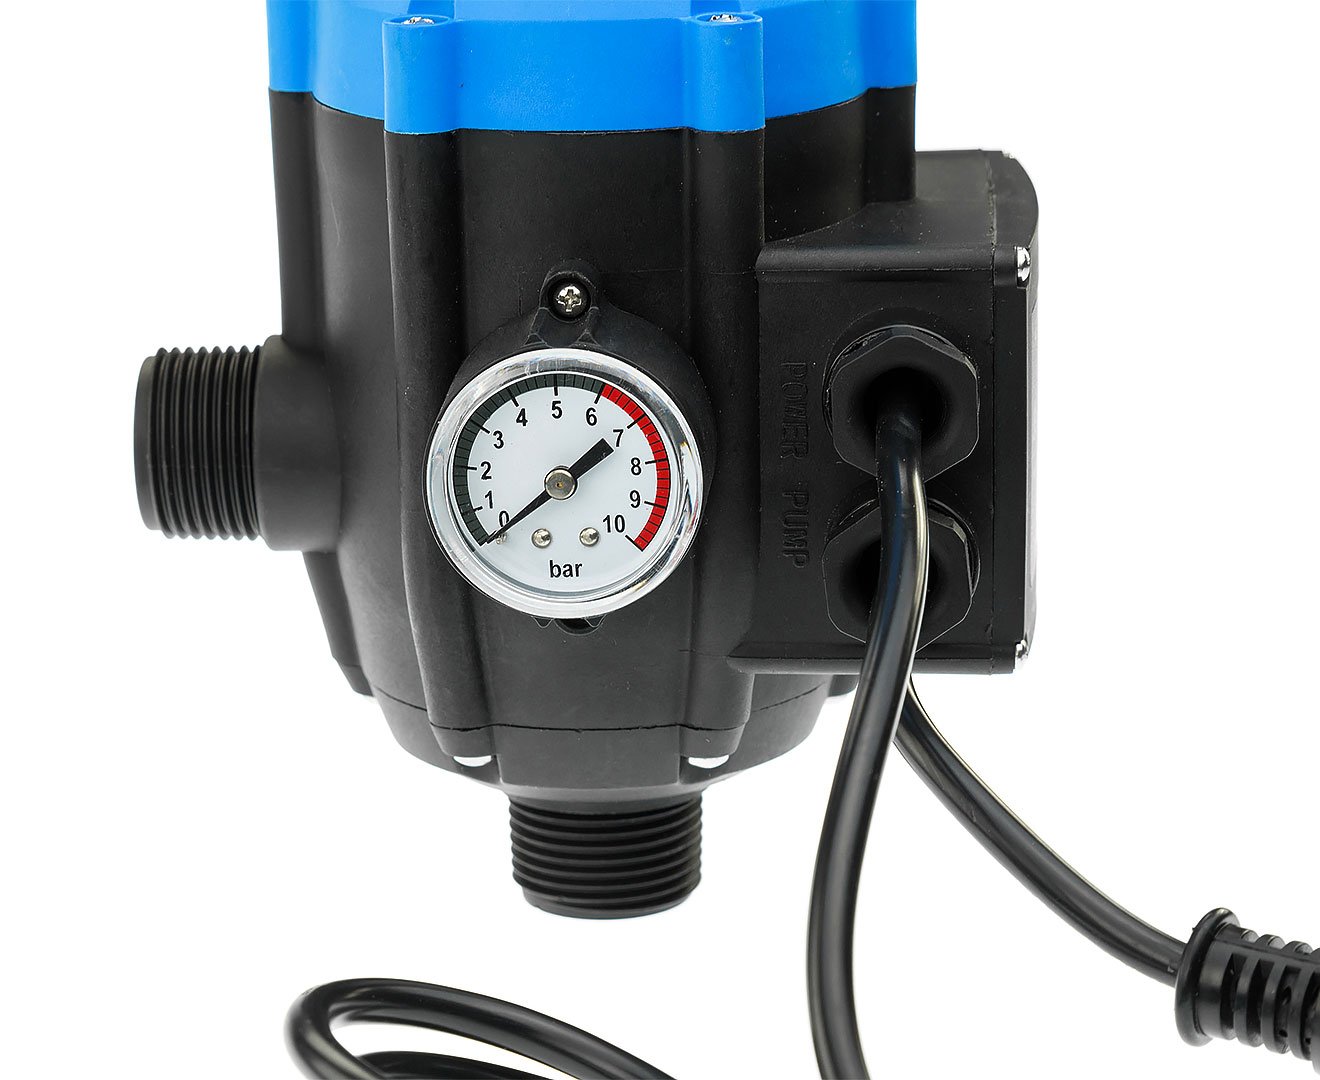 Water Pump Controller, Adjustable Pressure Switch, Electric, Electronic